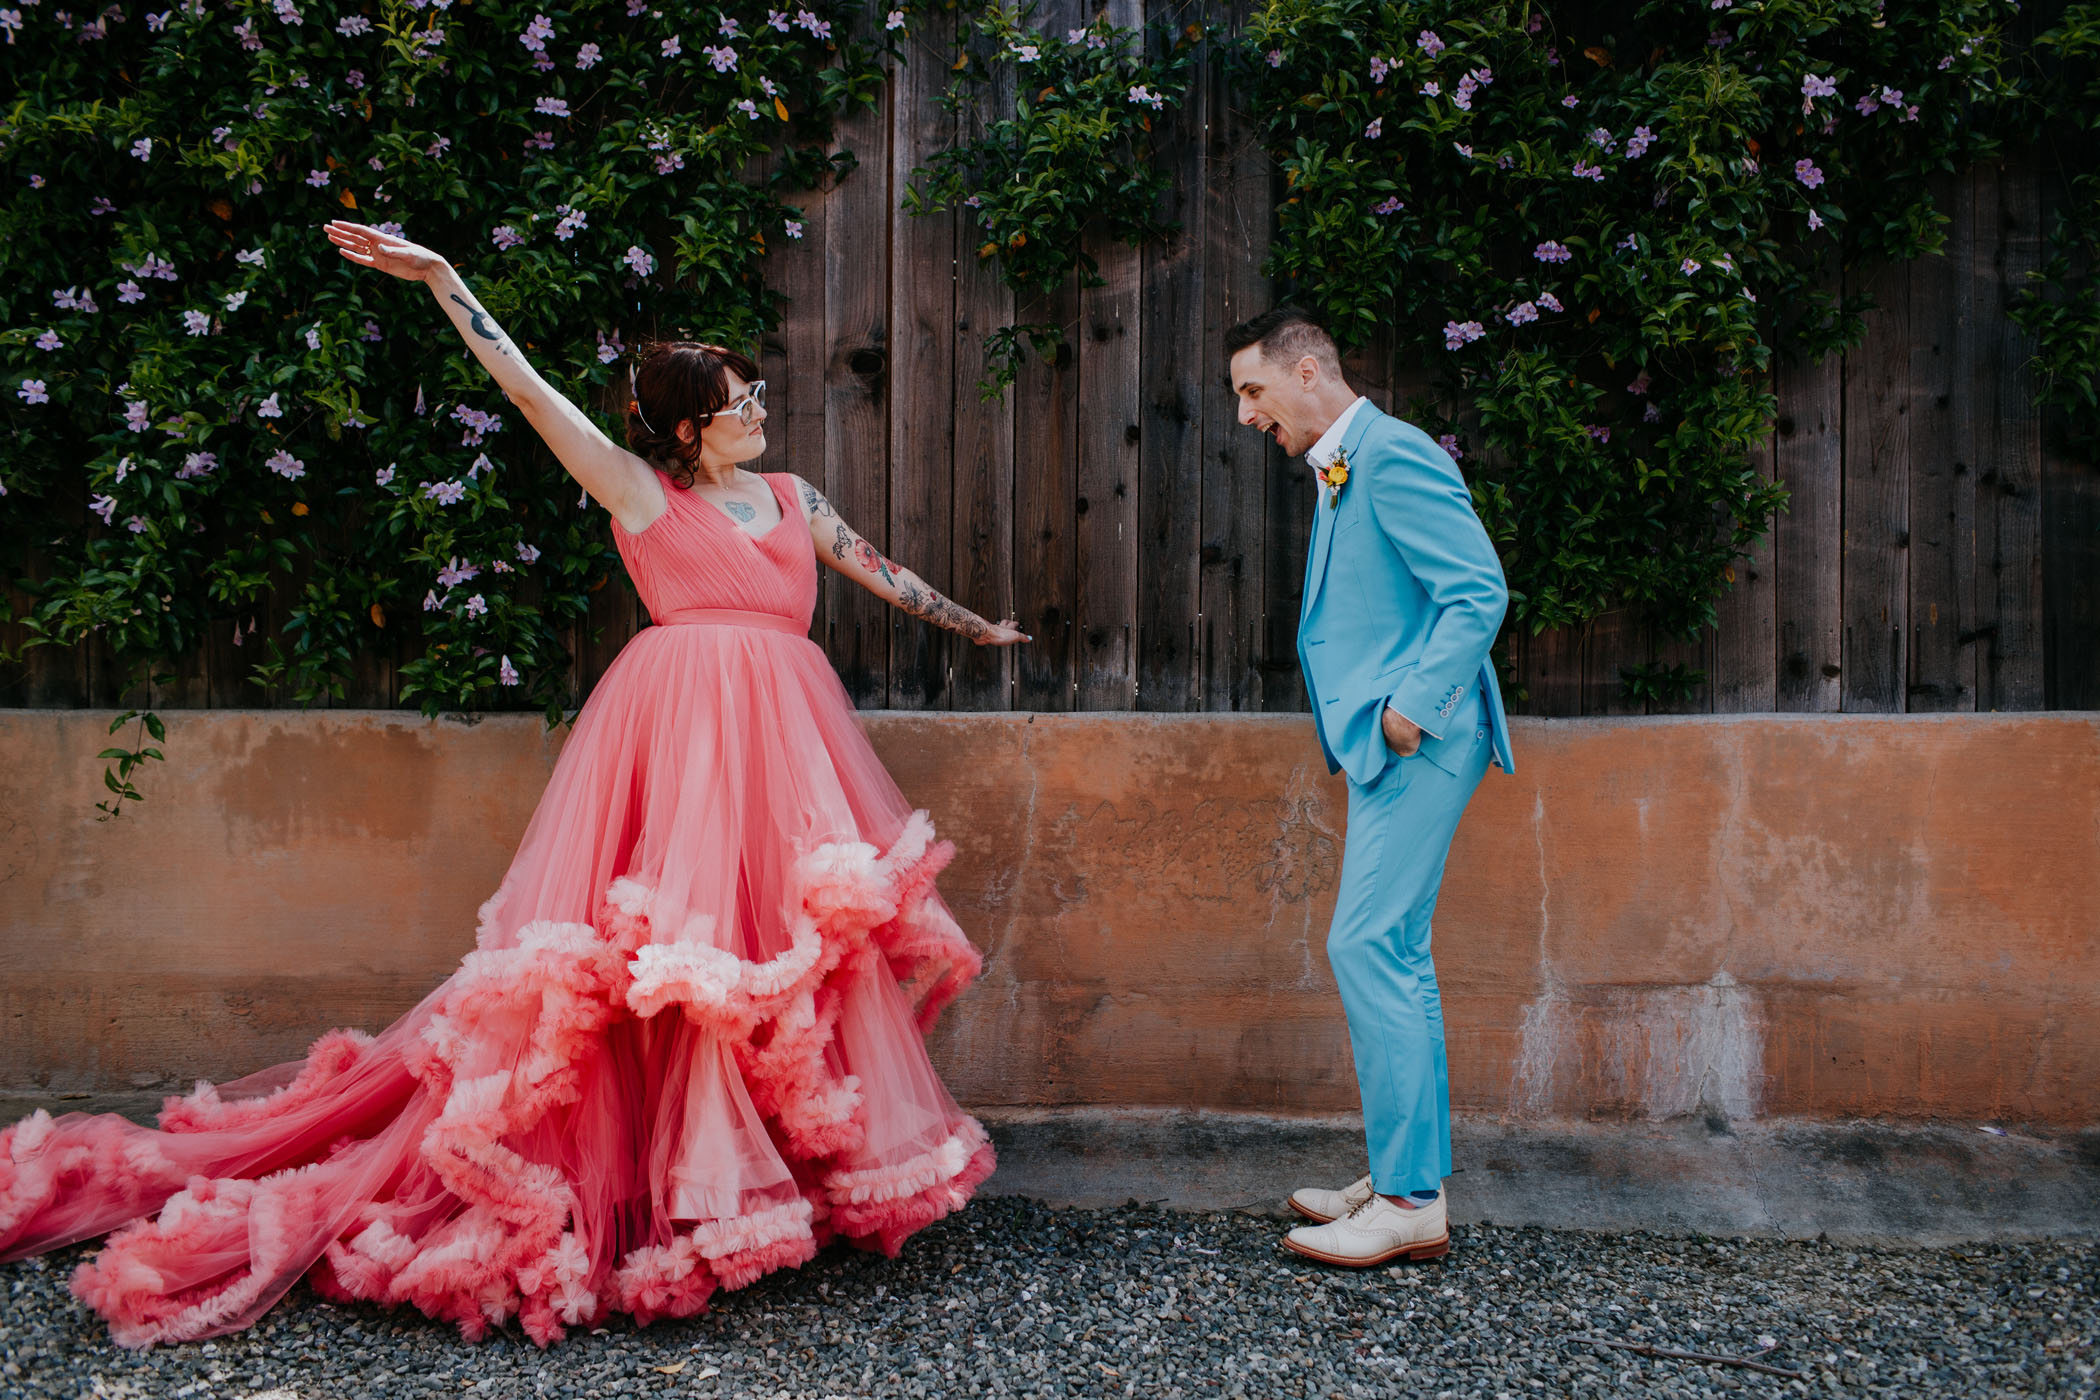 California Wedding With Cotton Candy Colors and a Bounce House